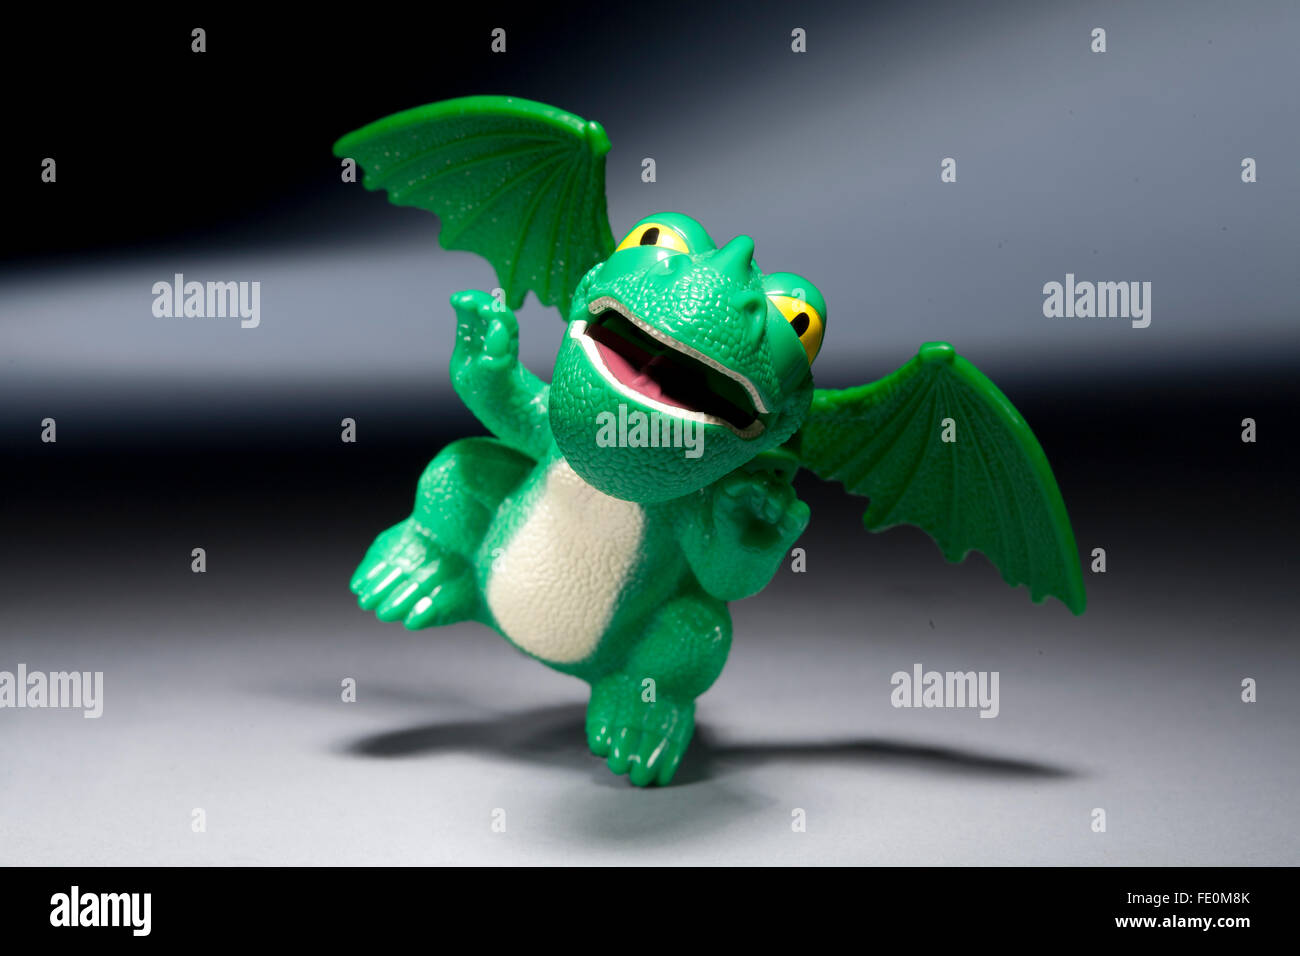 How to tame your Dragon happy meal toy on grey background Stock Photo